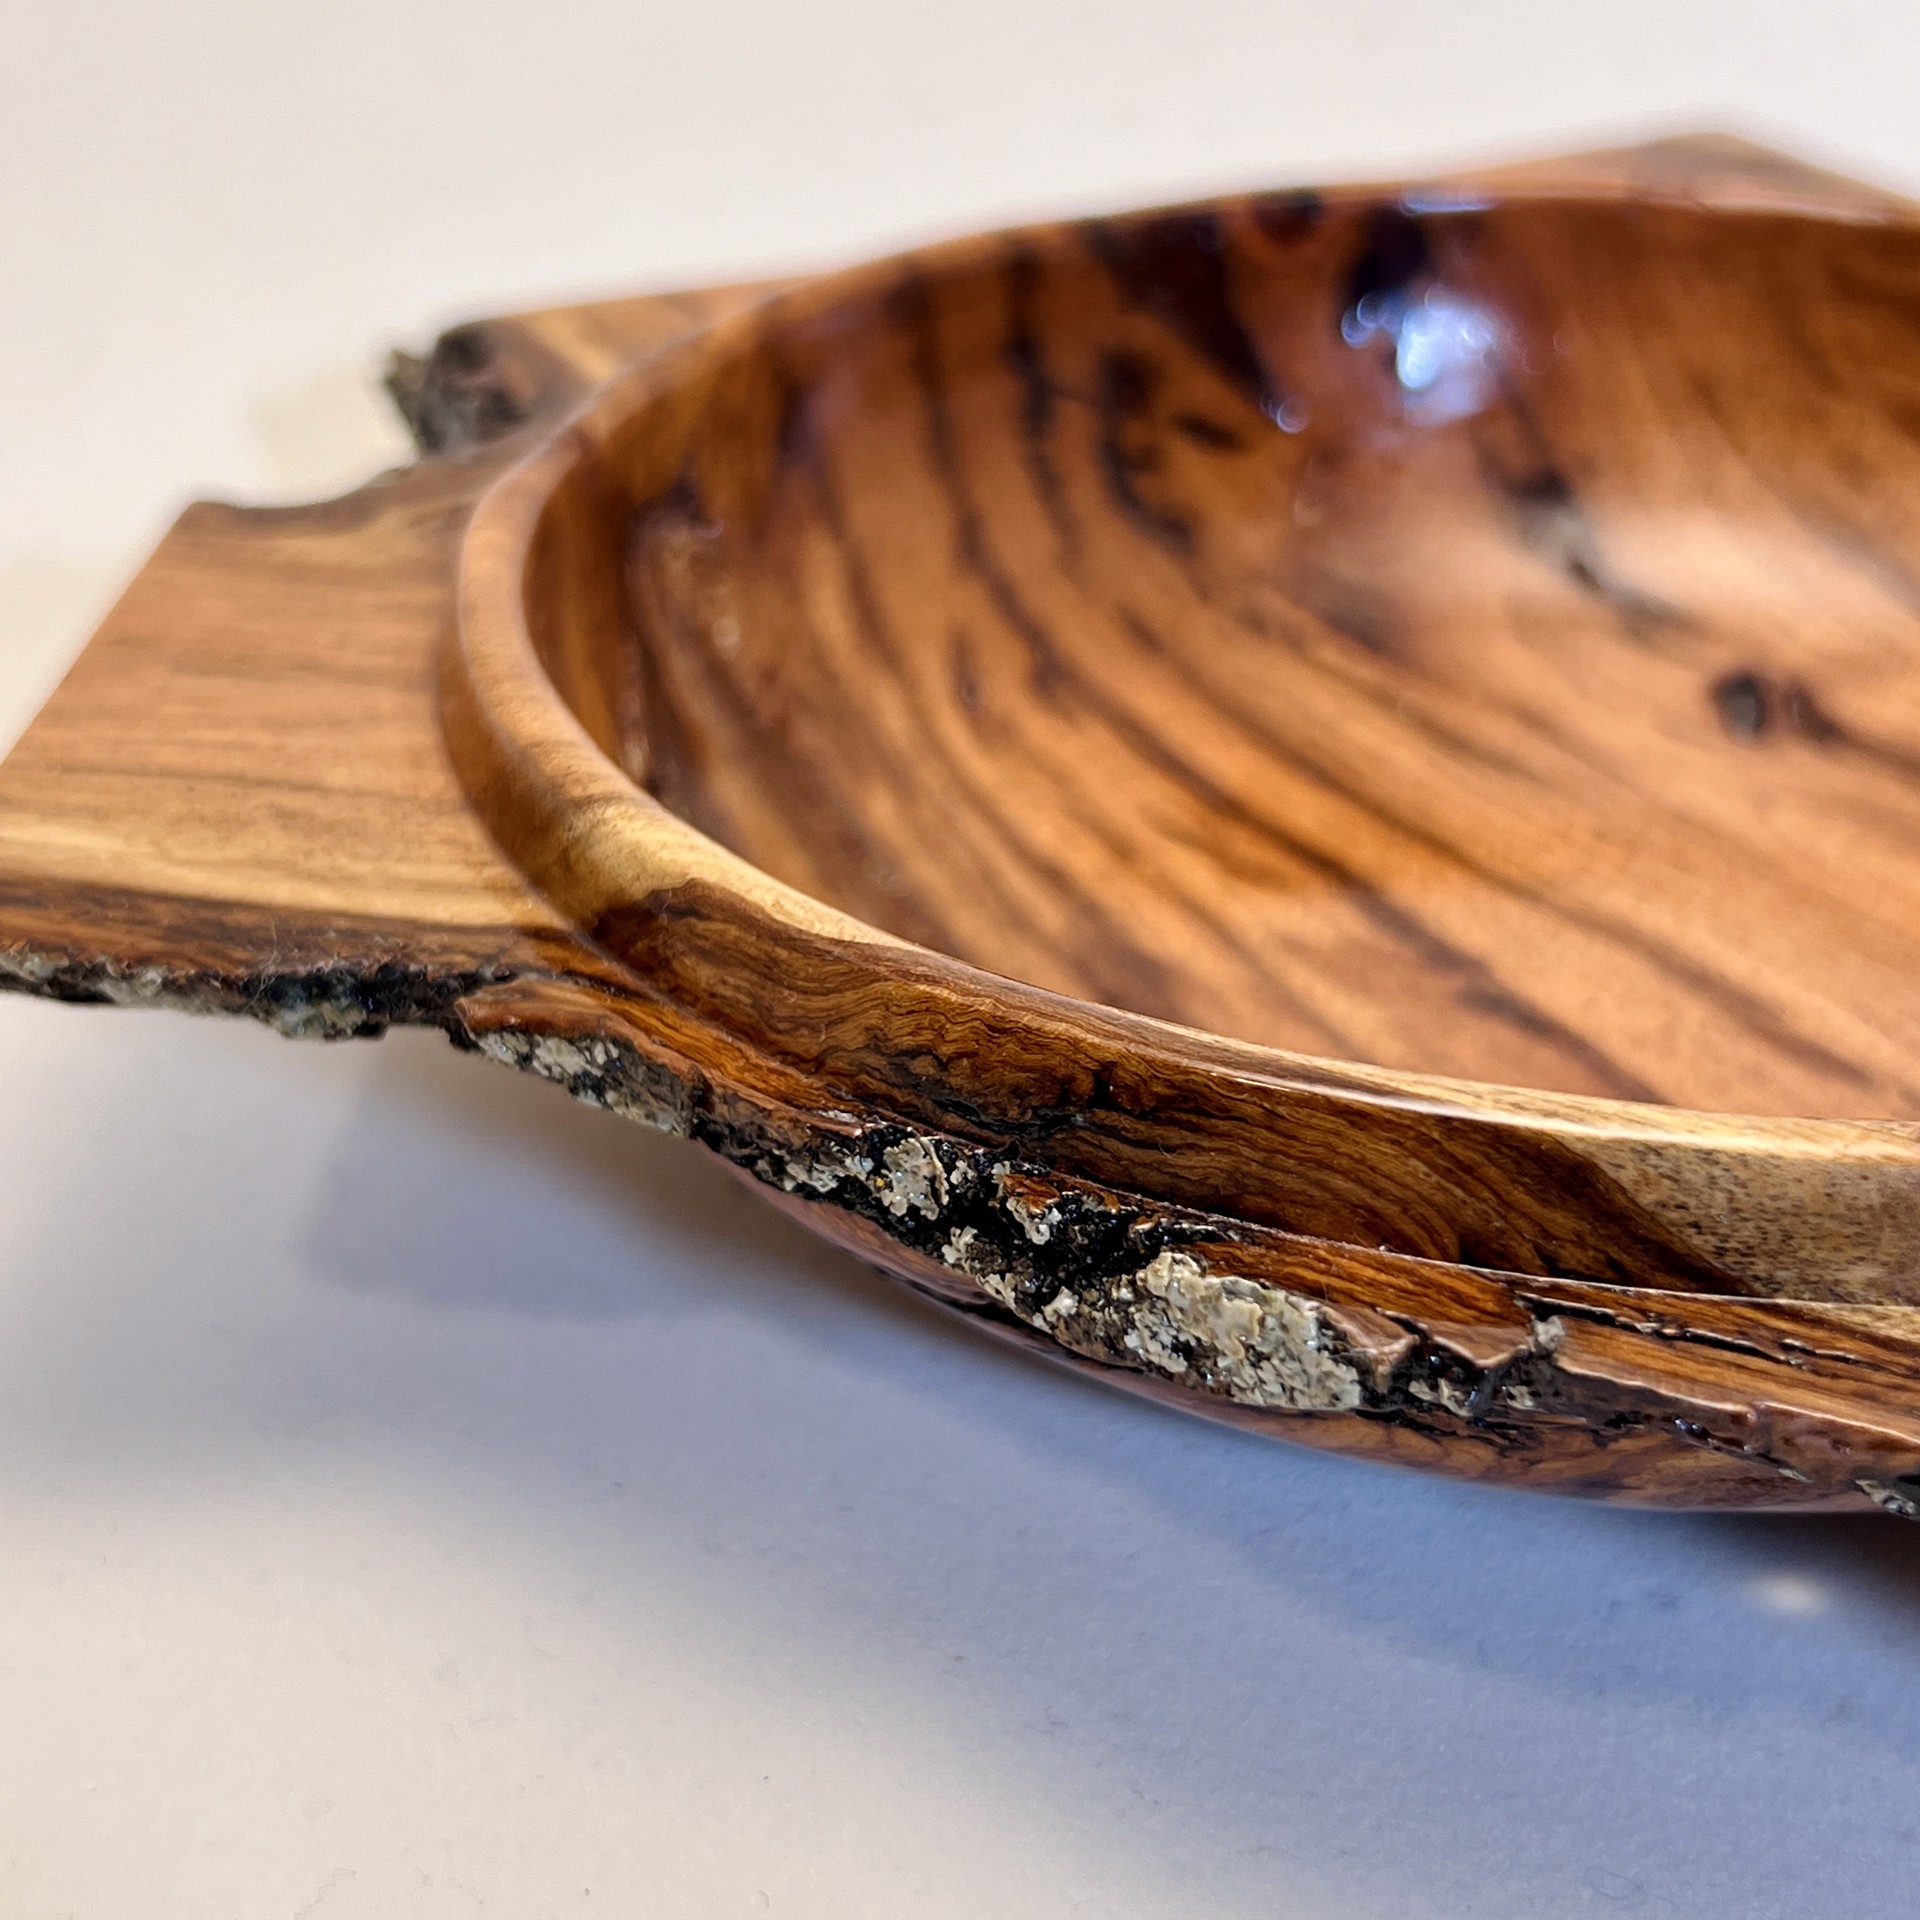 37. Mesquite Crouch Bowl by Don Kaiser